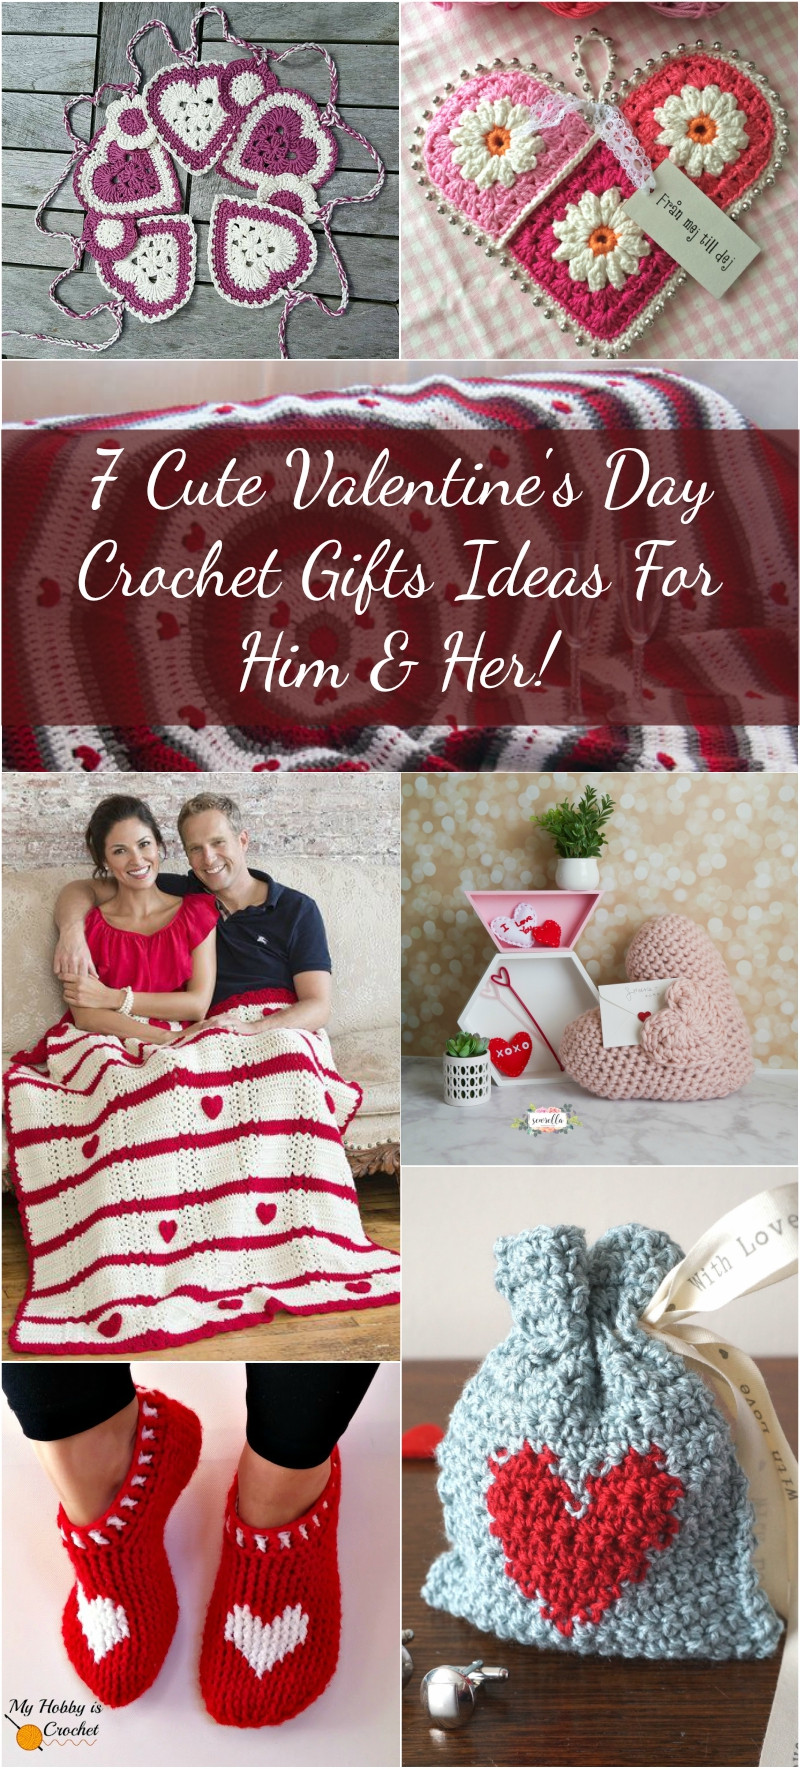 Valentines Gift Ideas For Her
 7 Cute Valentine s Day Crochet Gifts Ideas For Him & Her